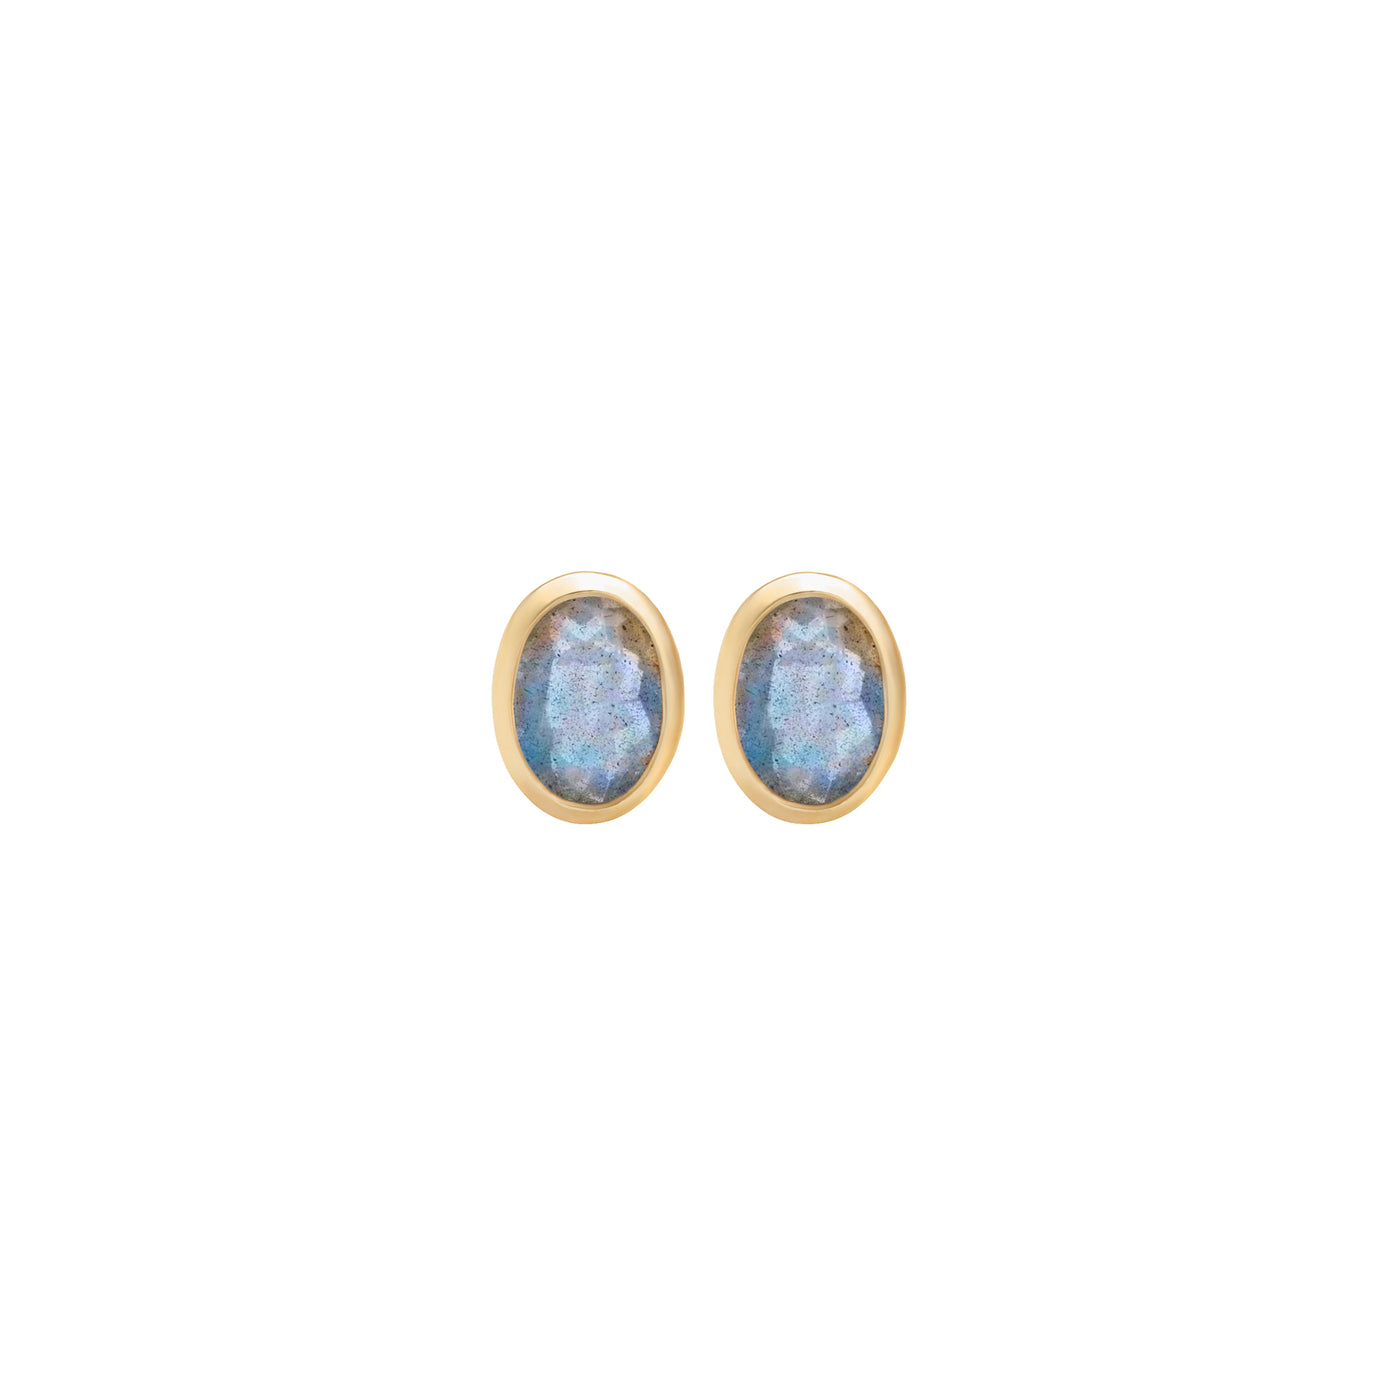 14 Karat Yellow Gold Studs with Oval Shaped Labradorite Stone Against White Background